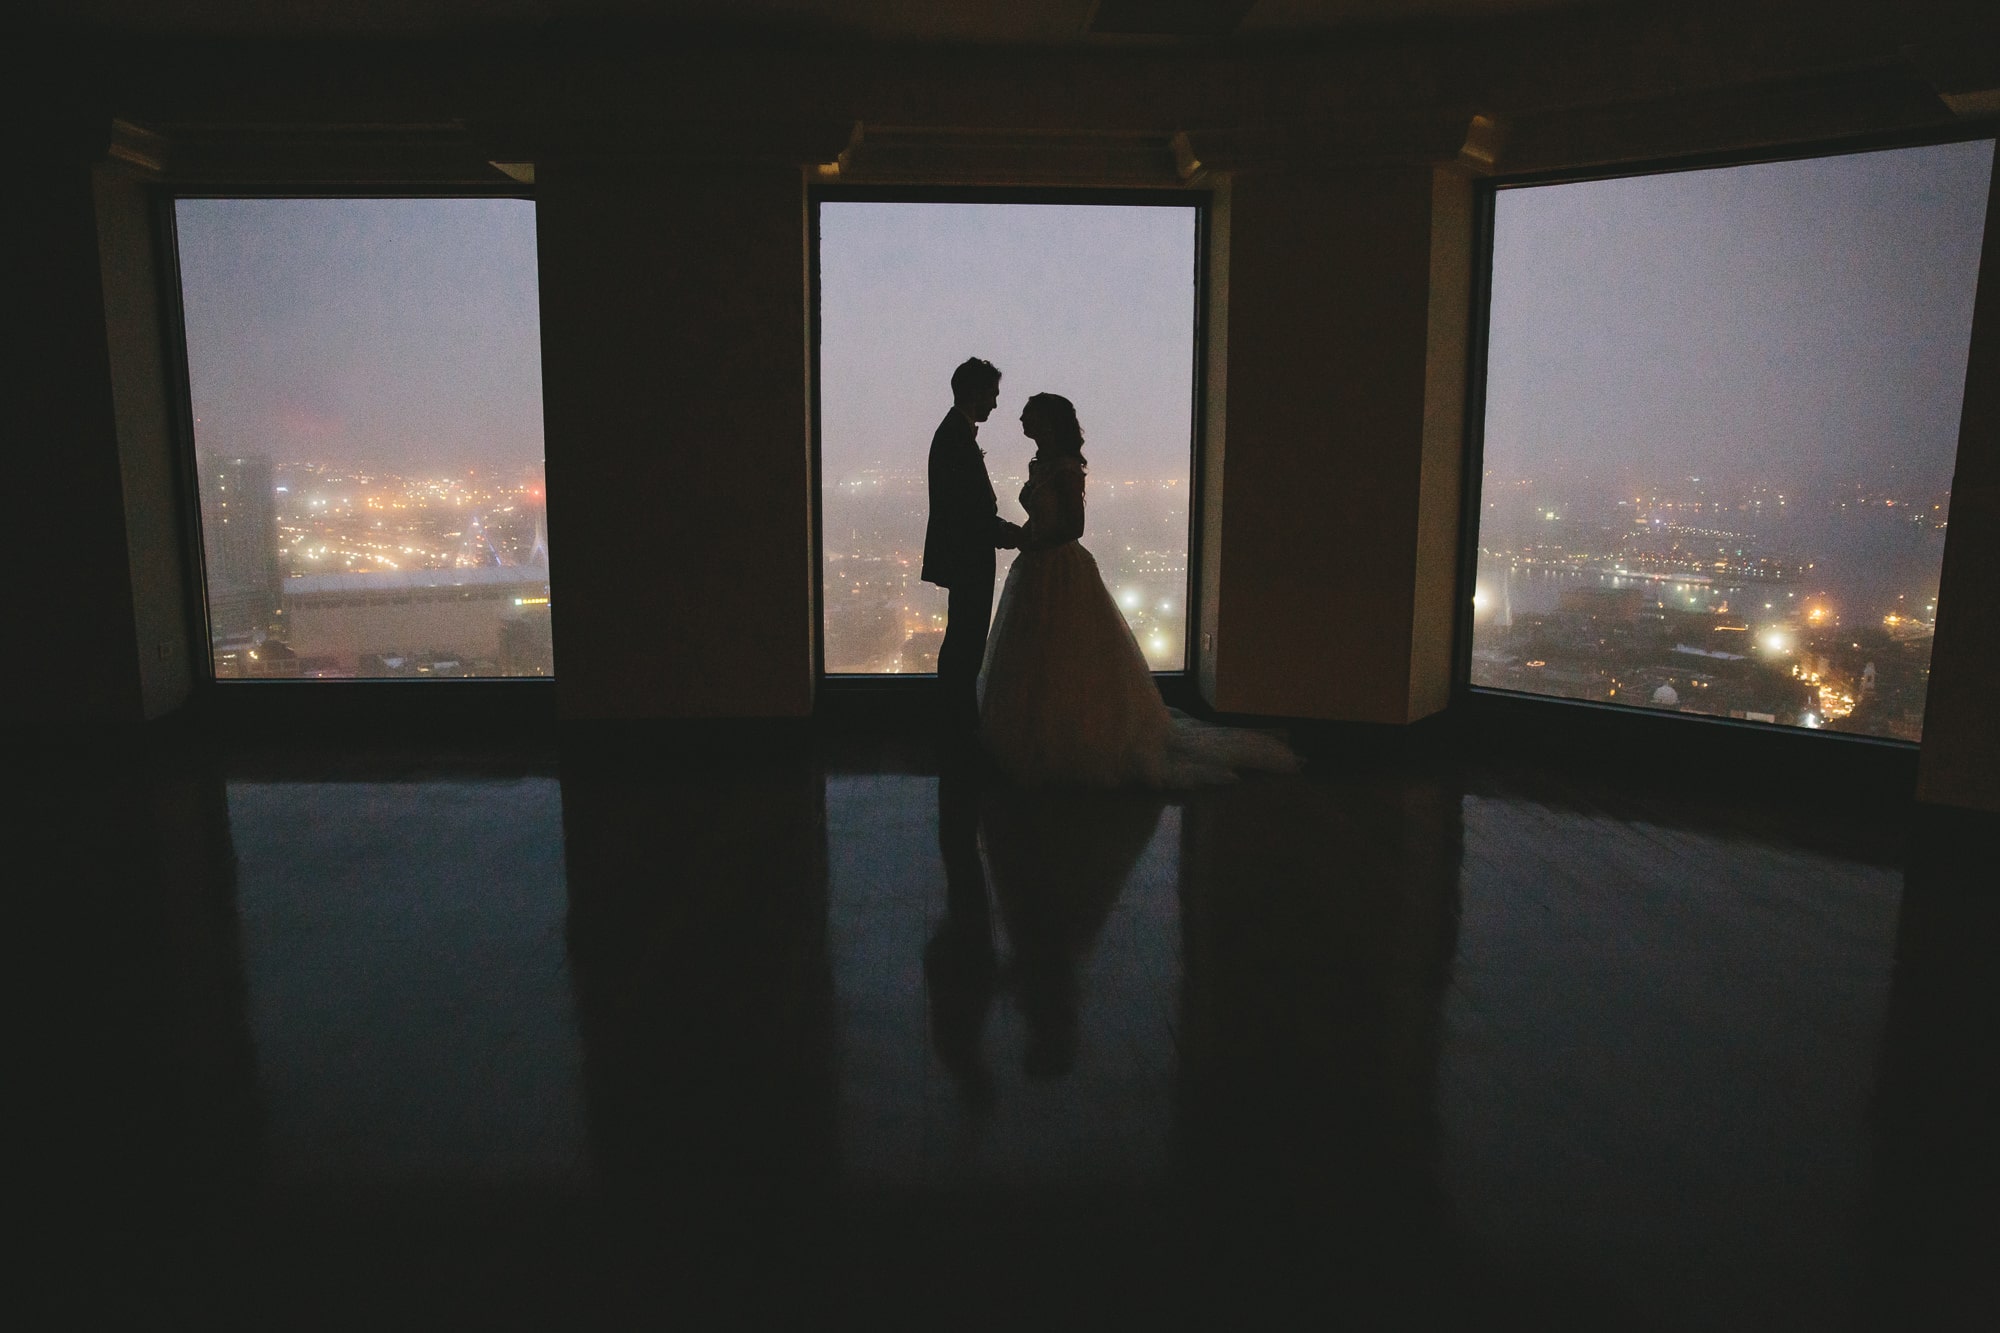 This dramatic portrait of a bride and groom at a State Room wedding is one of the best wedding photographs of 2016